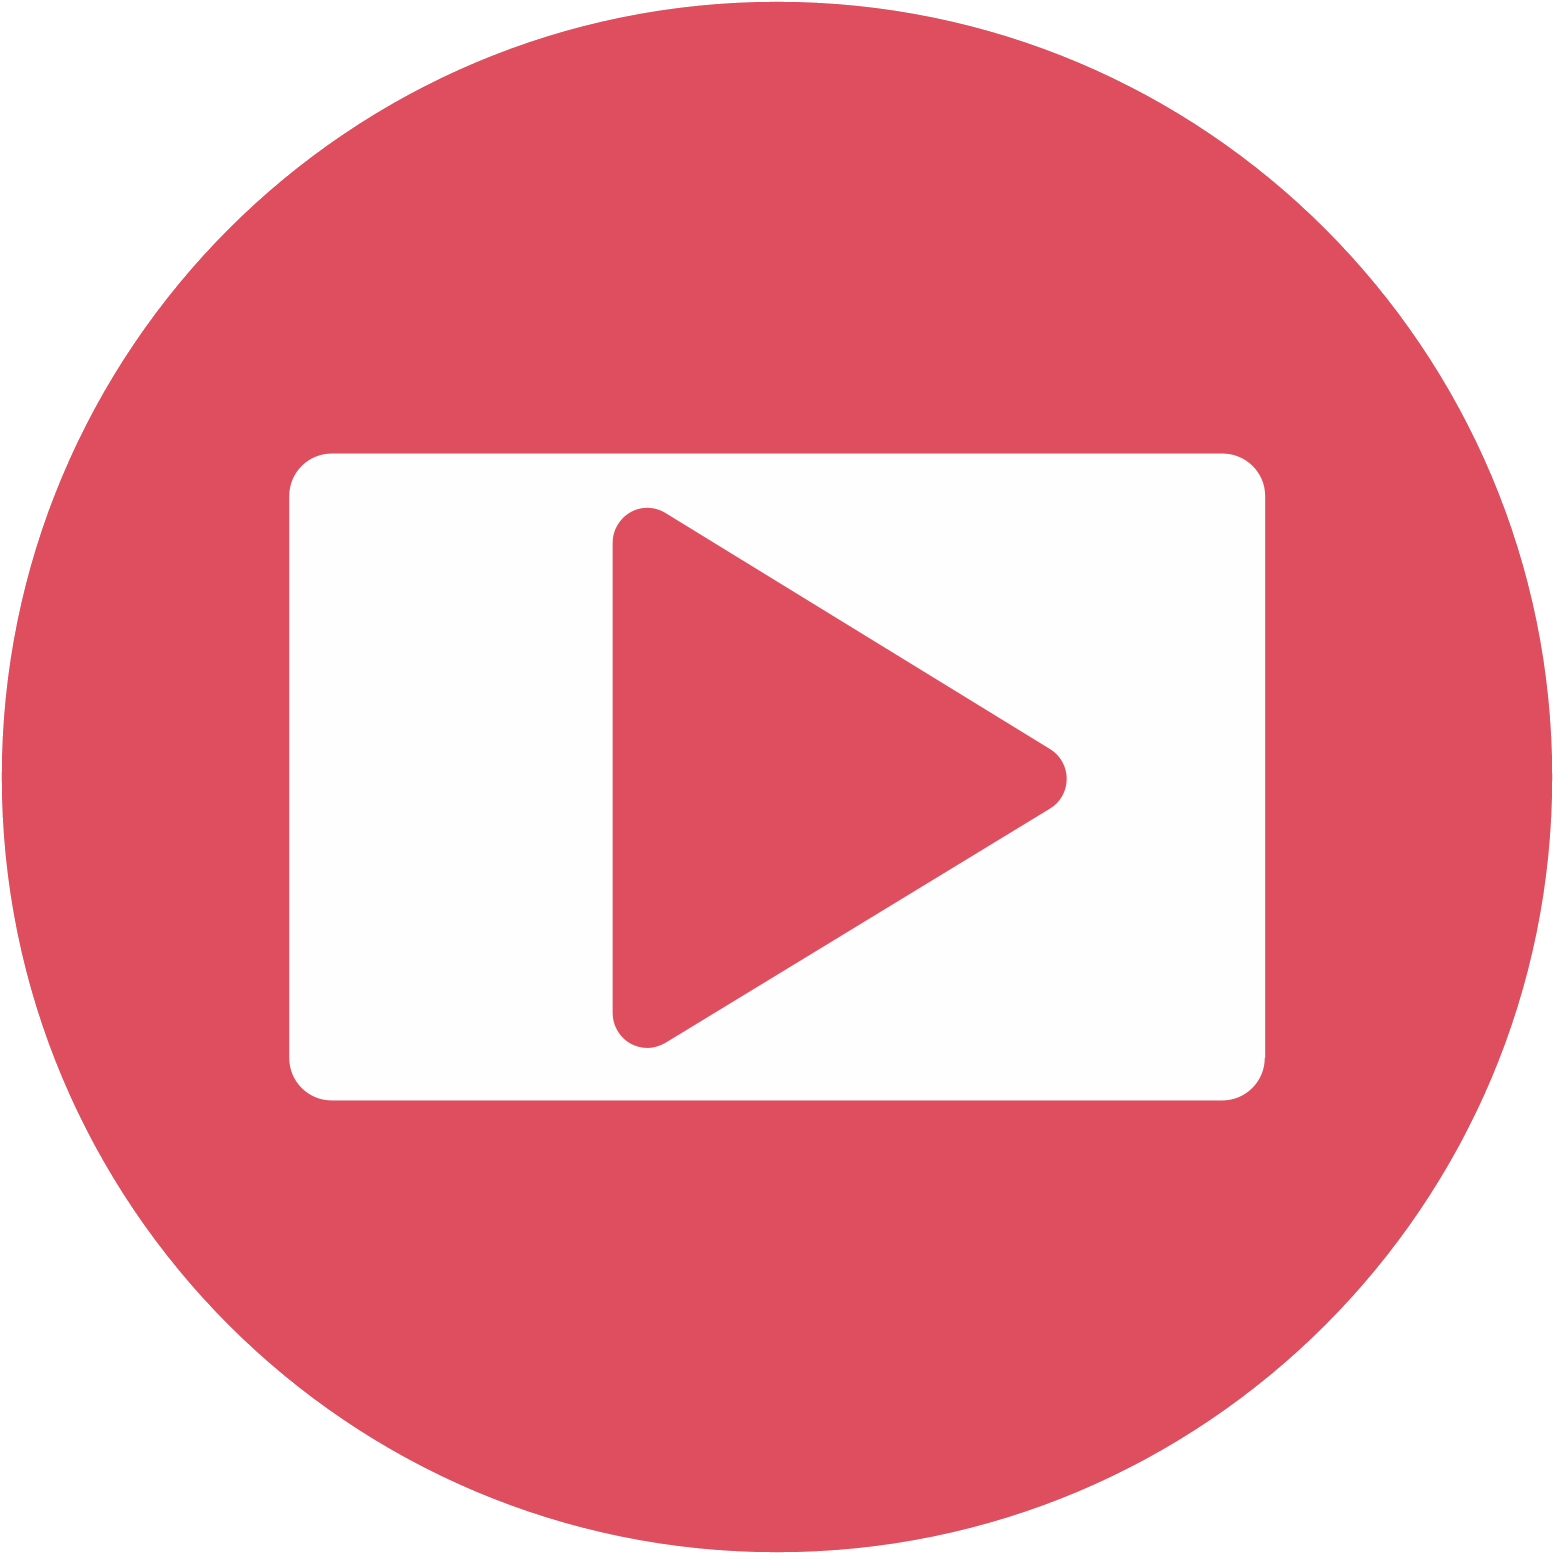 Icono Play Youtube Png - Icon (1600x1600), Png Download